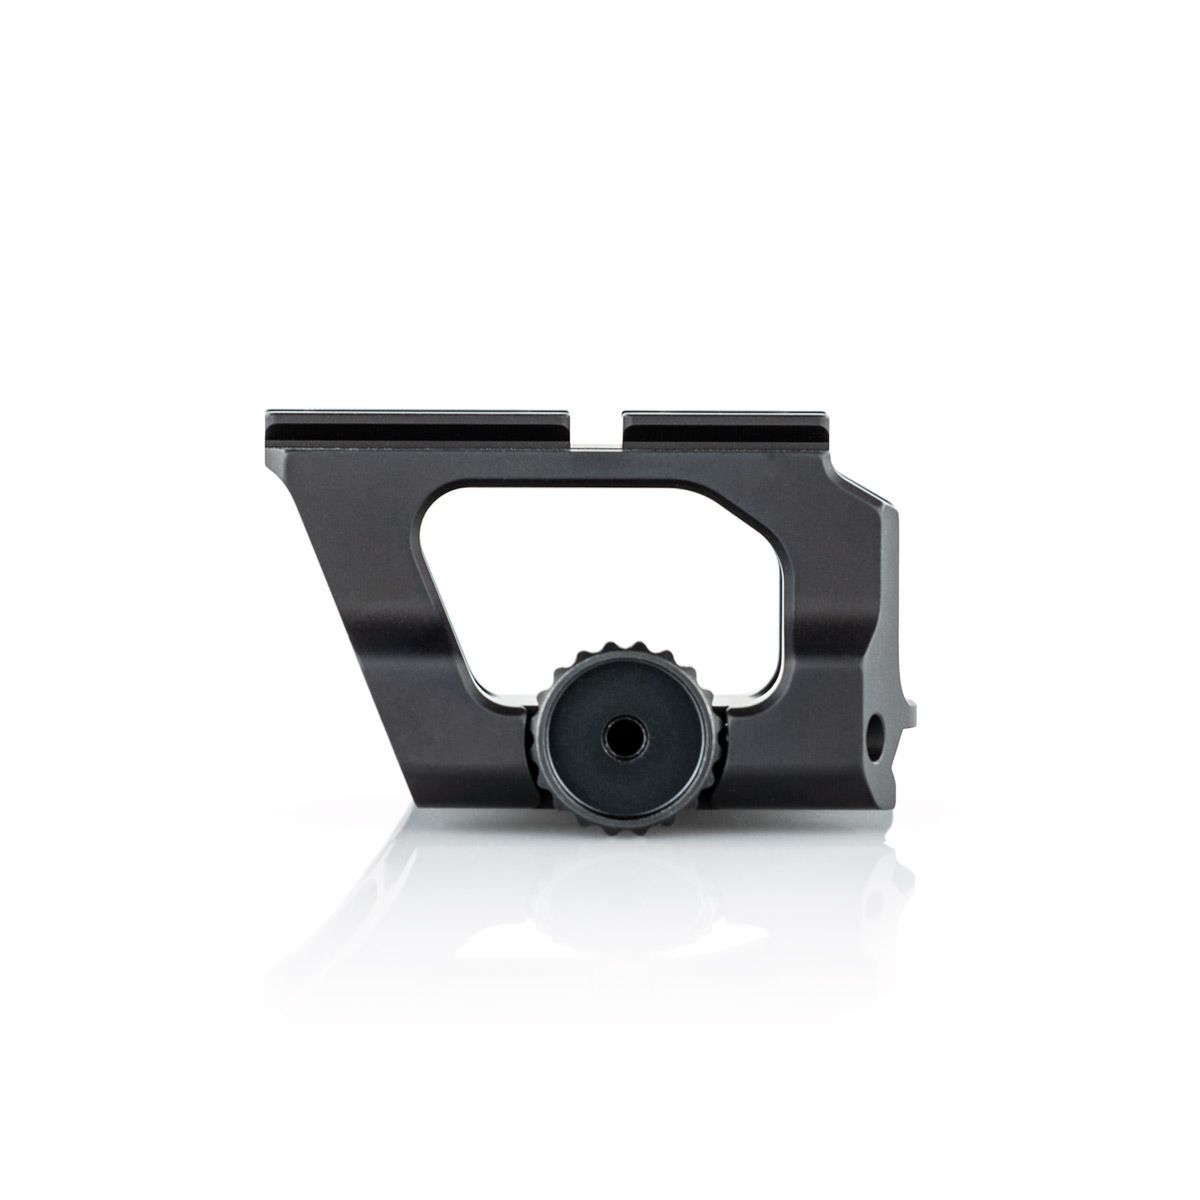 Scalarworks LEAP/03 Aimpoint ACRO Mount | 5 Star Rating w/ Free